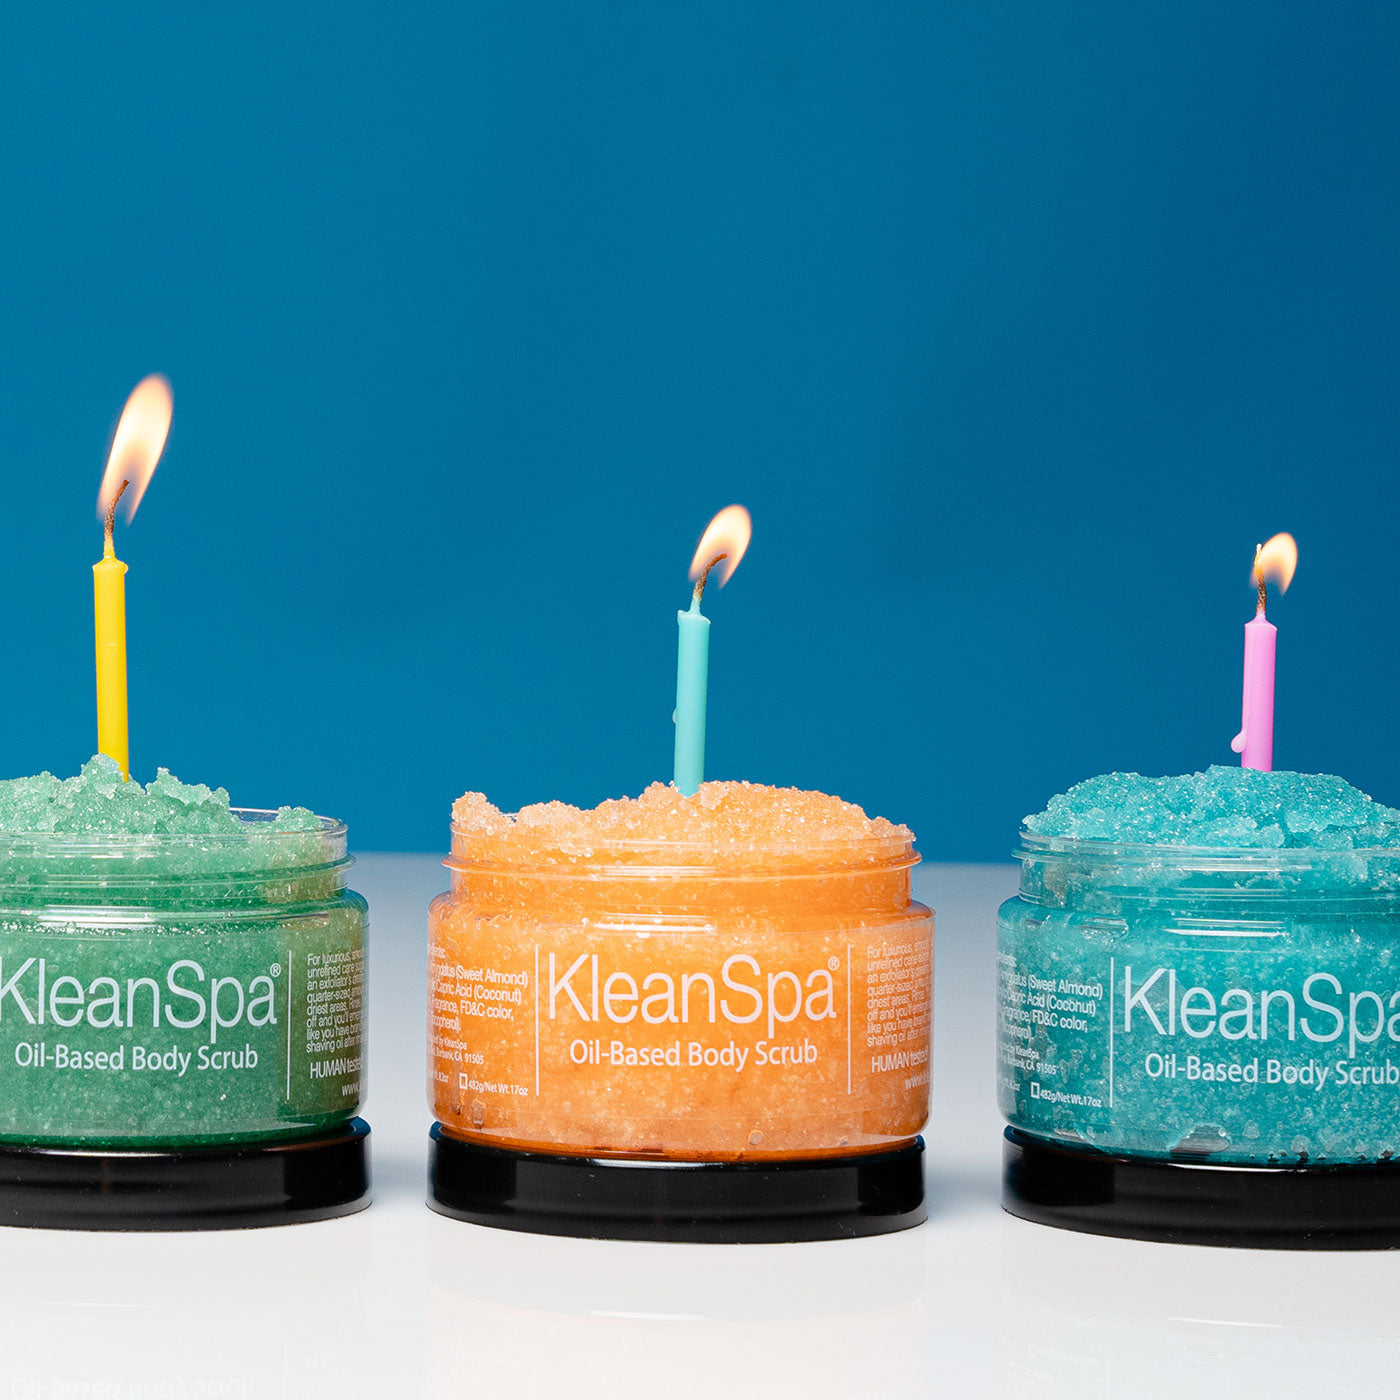 sugar scrubs with a birthday candle in each scrub - great for gifting!